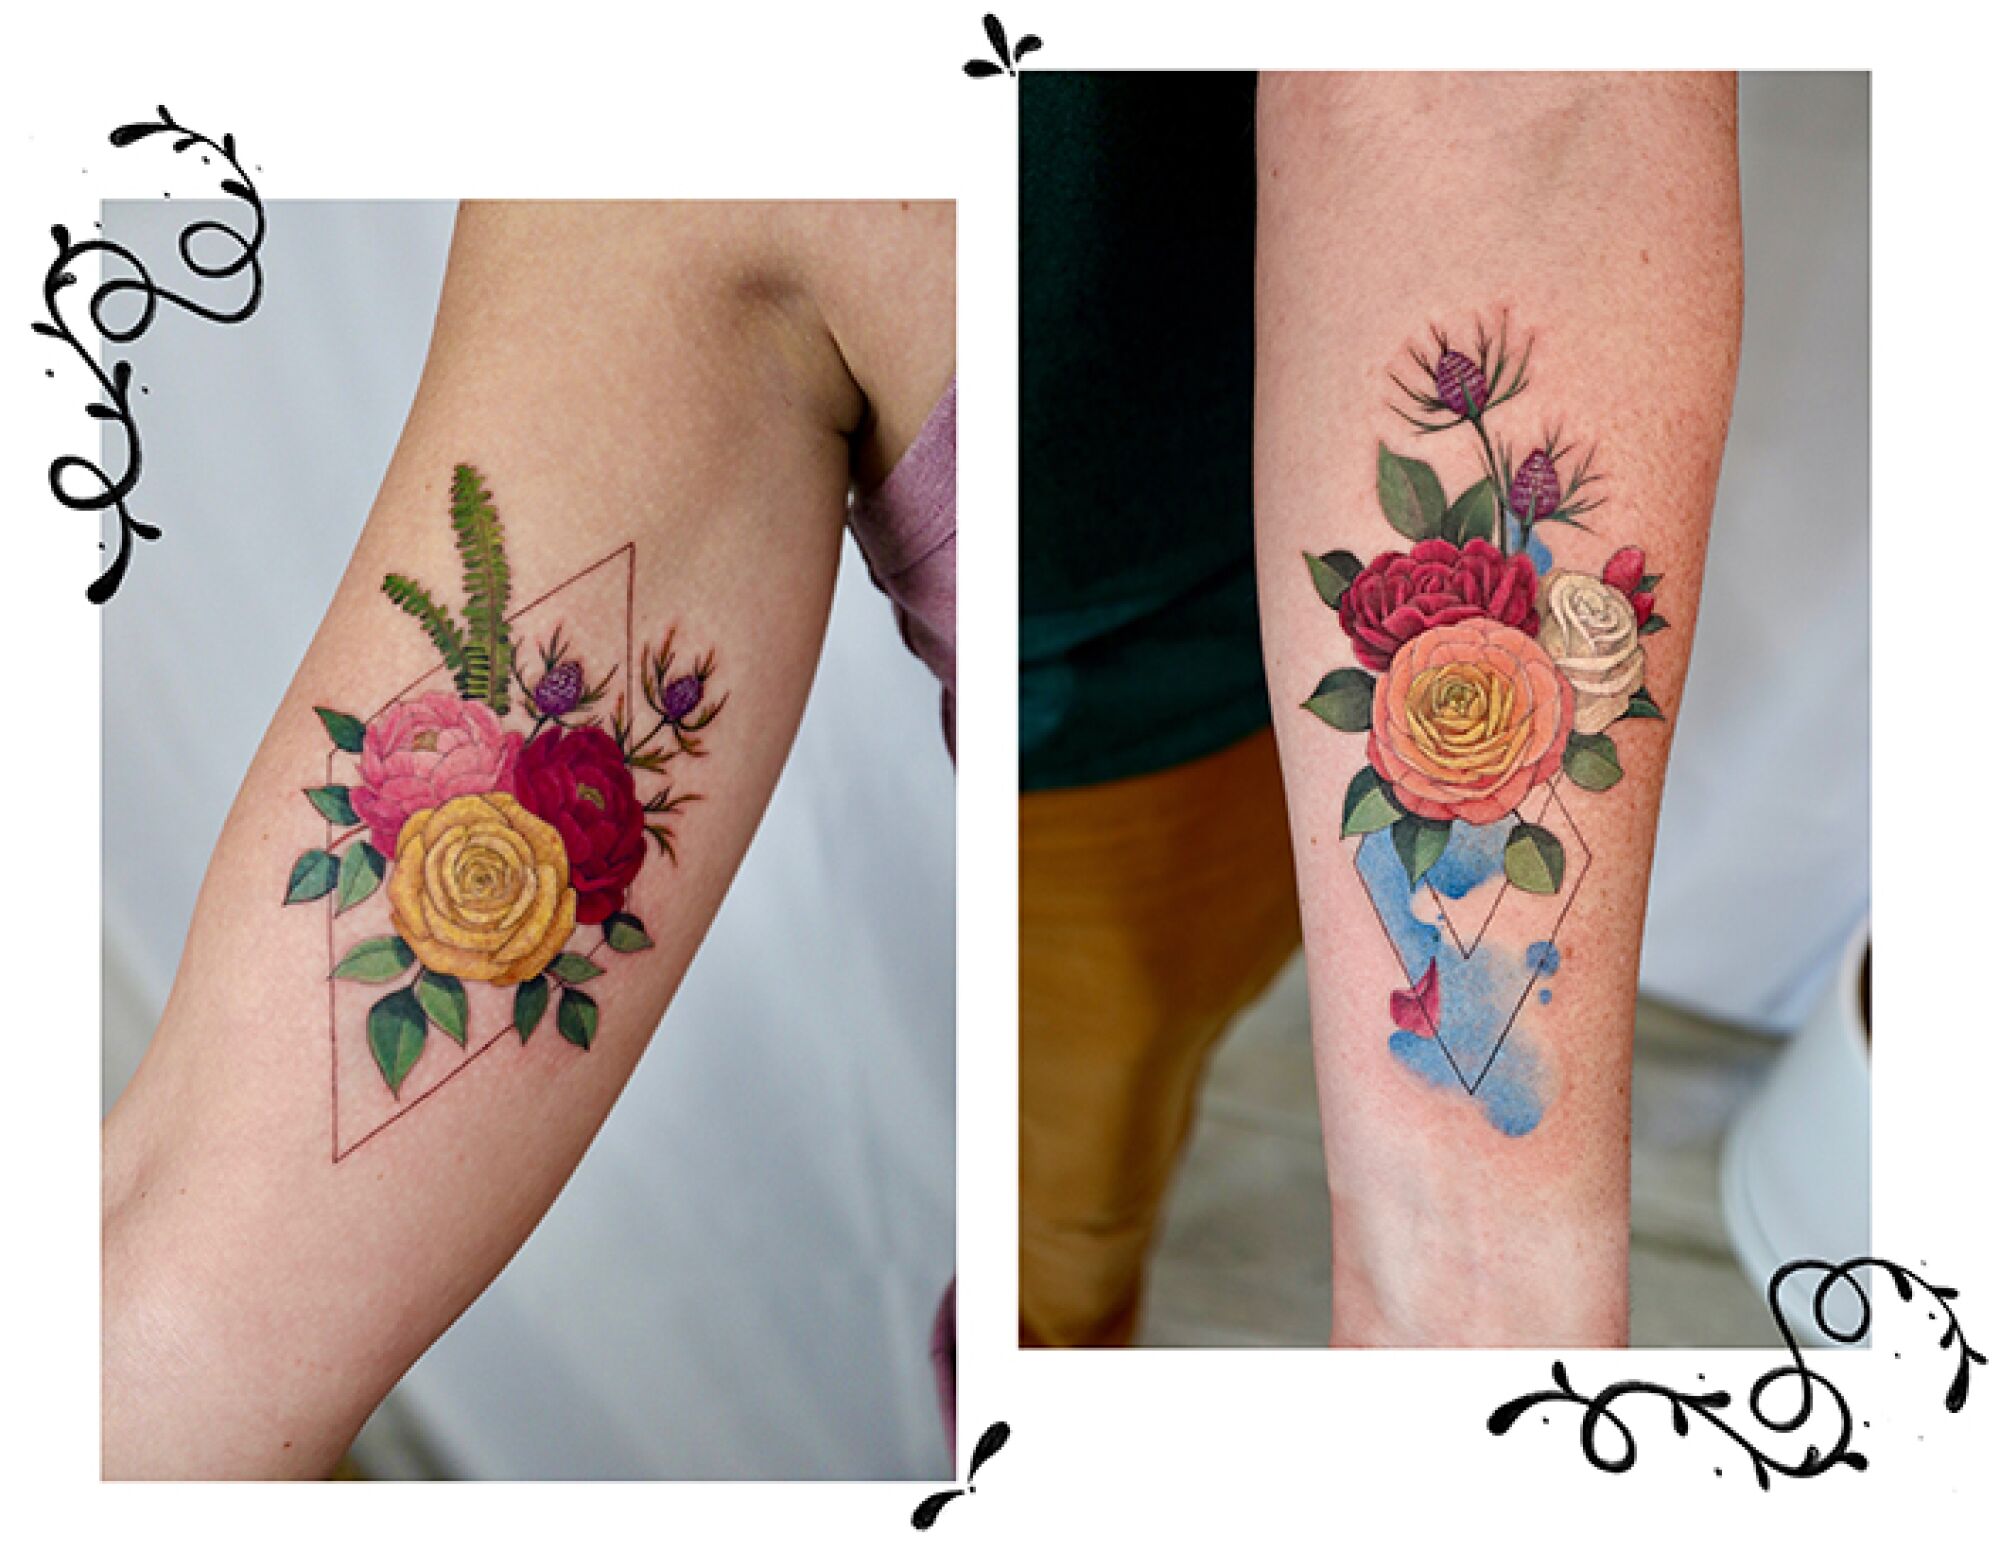 Tattoos of a couple's wedding flowers on their arms. 